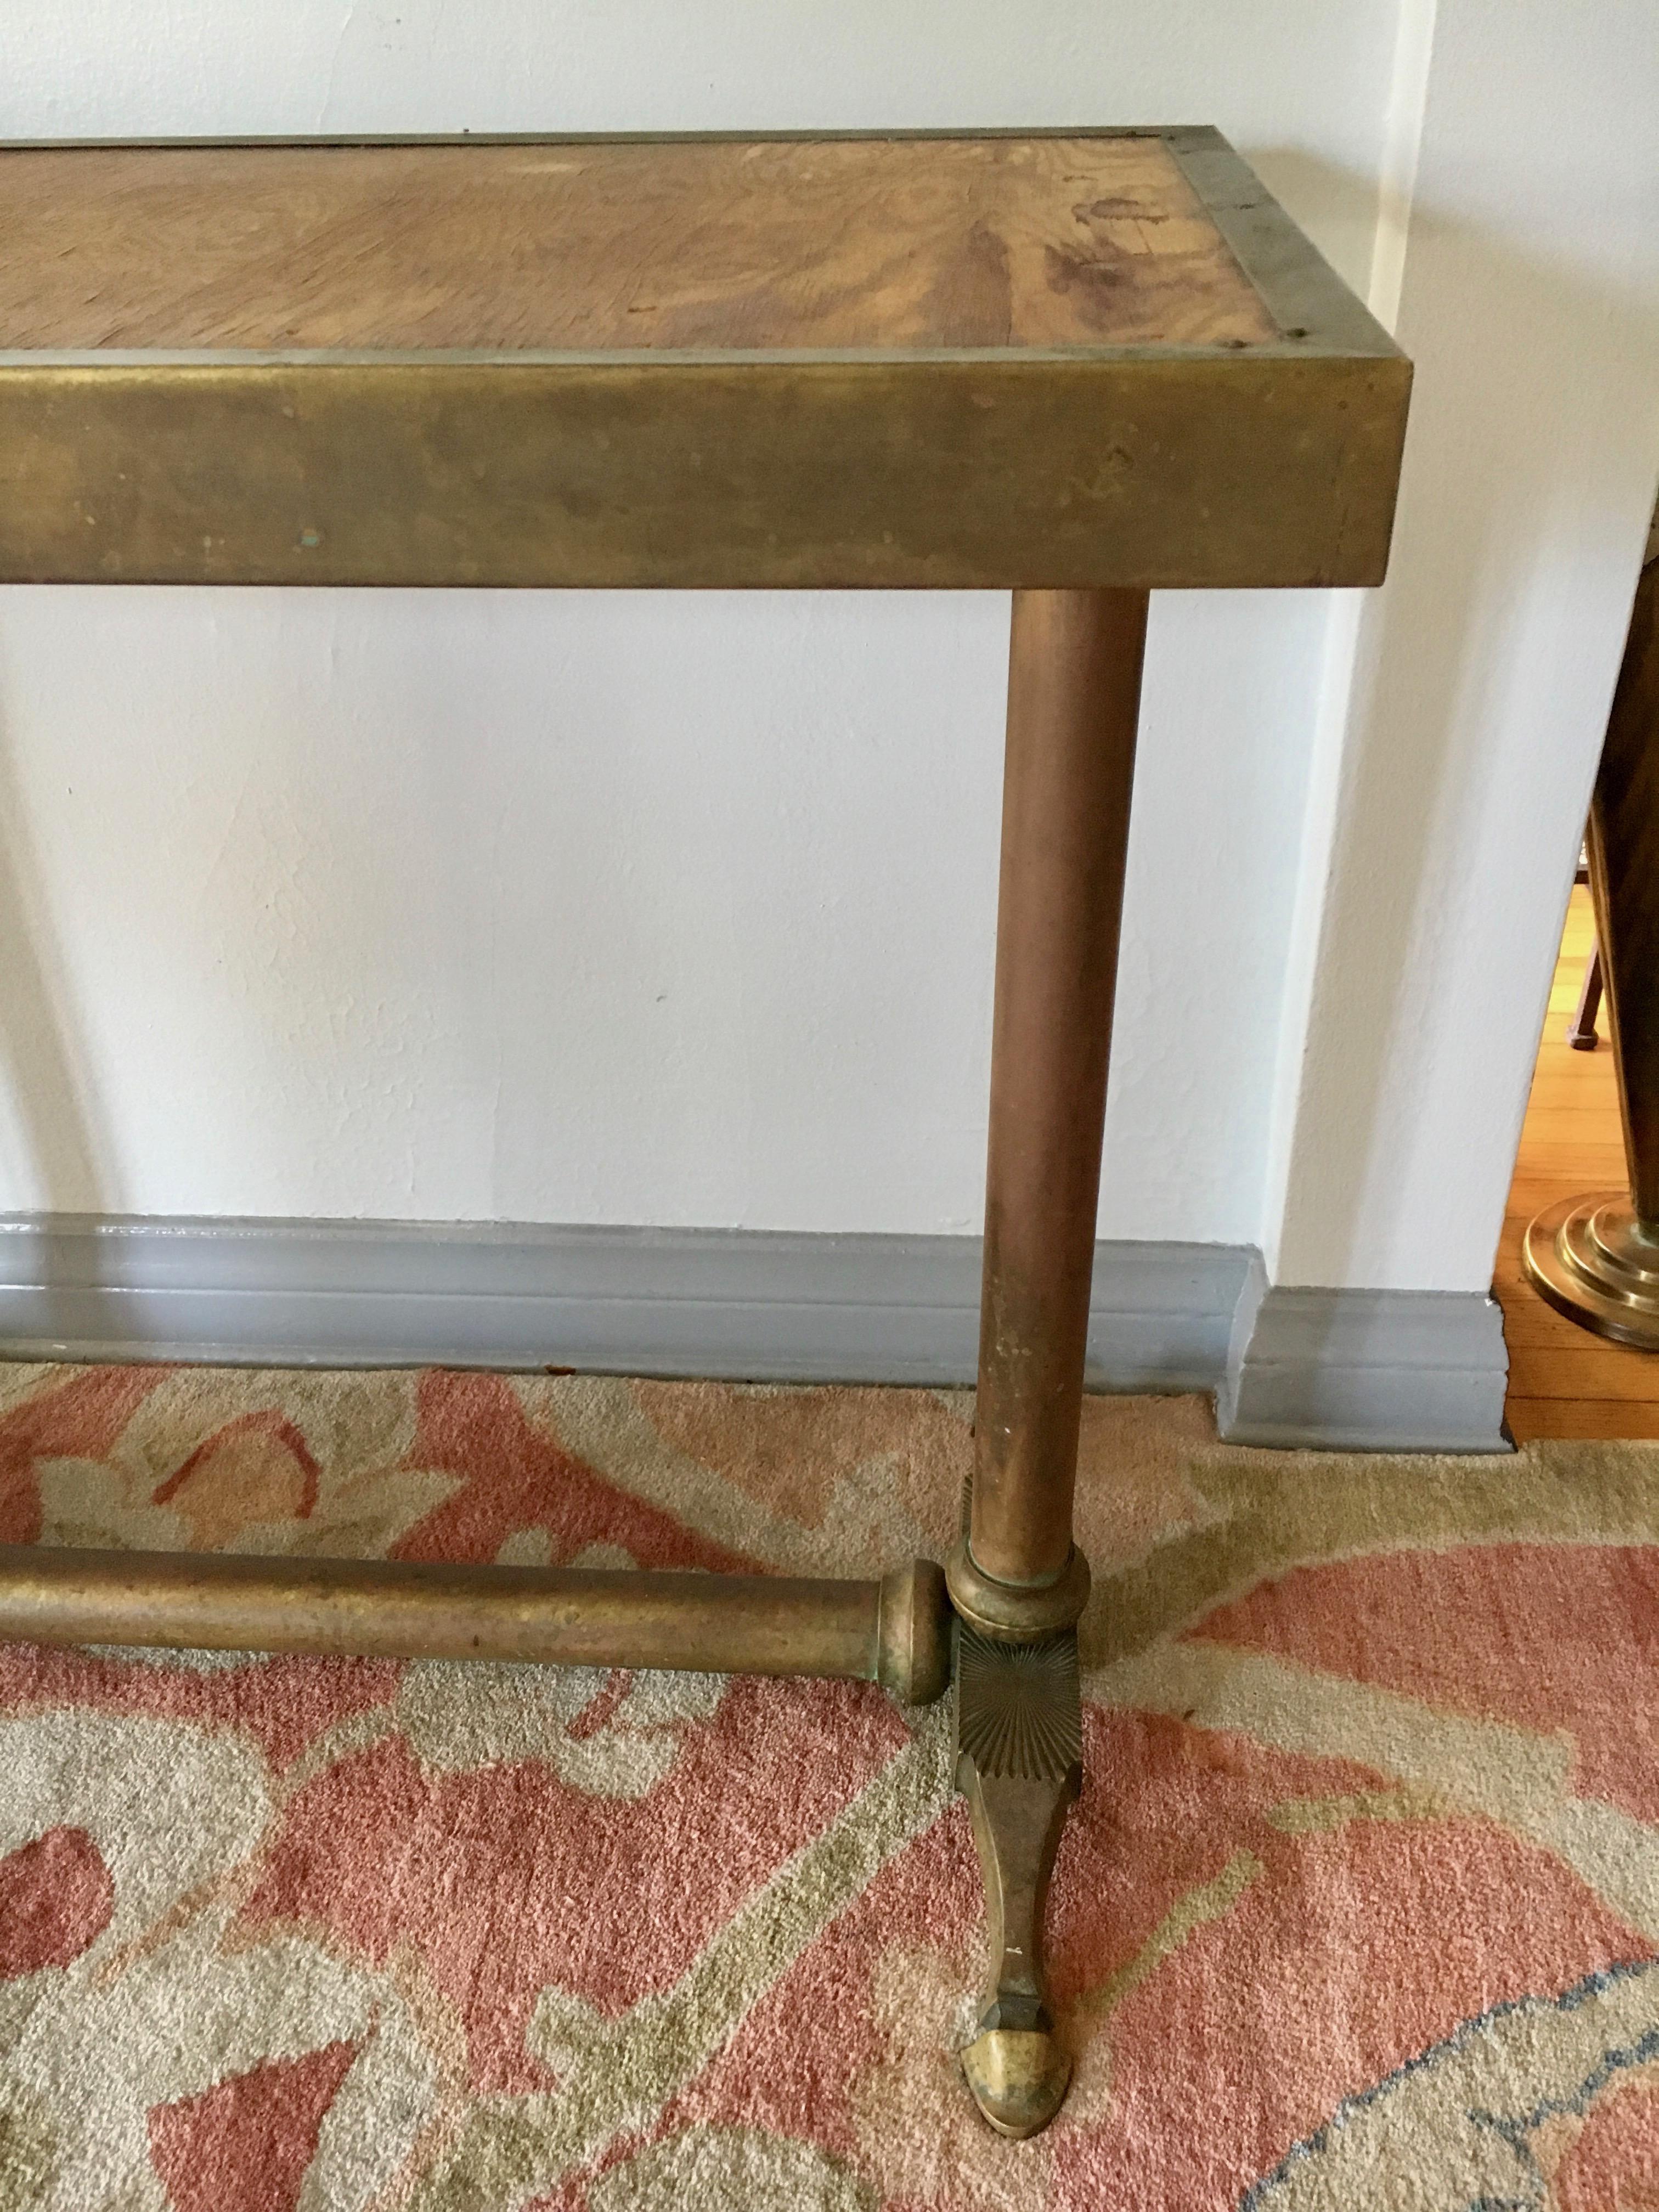 Very unique and handsome brass console table with beautifully detailed legs - a true vintage stunner.

Wonderful in any part of the home - sofa or console table, Library, or as a desk - study table in den or kitchen.

The top of plywood is